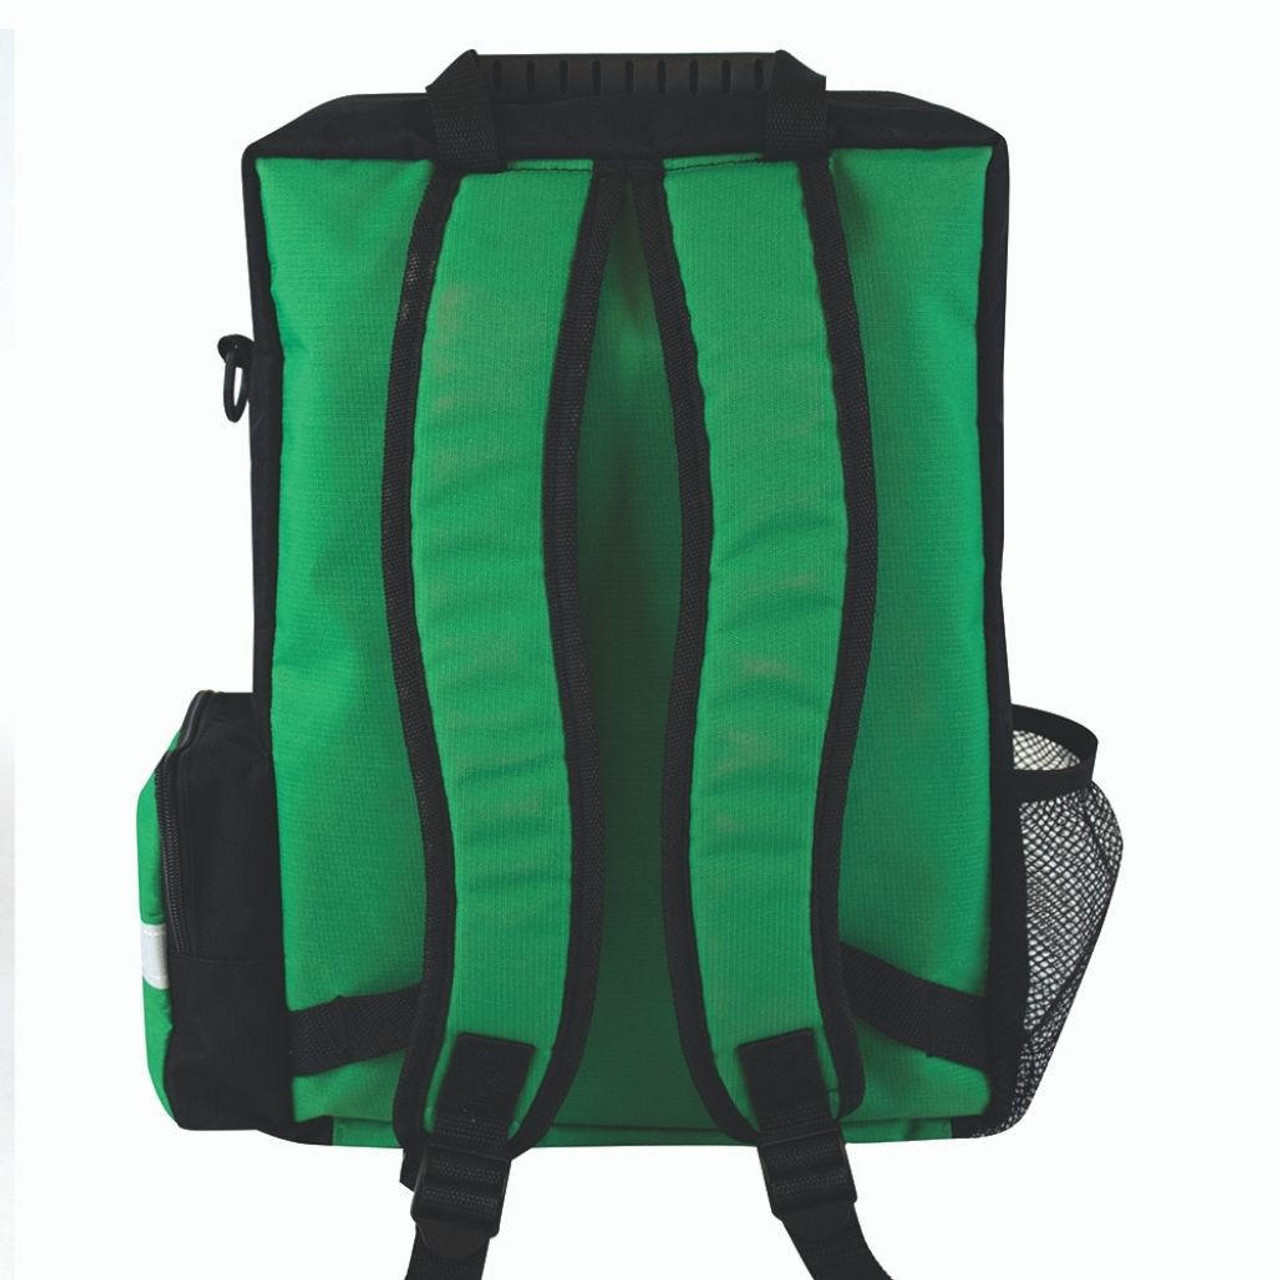 First Aid Medical Responder Rucksack Backpack Green Empty